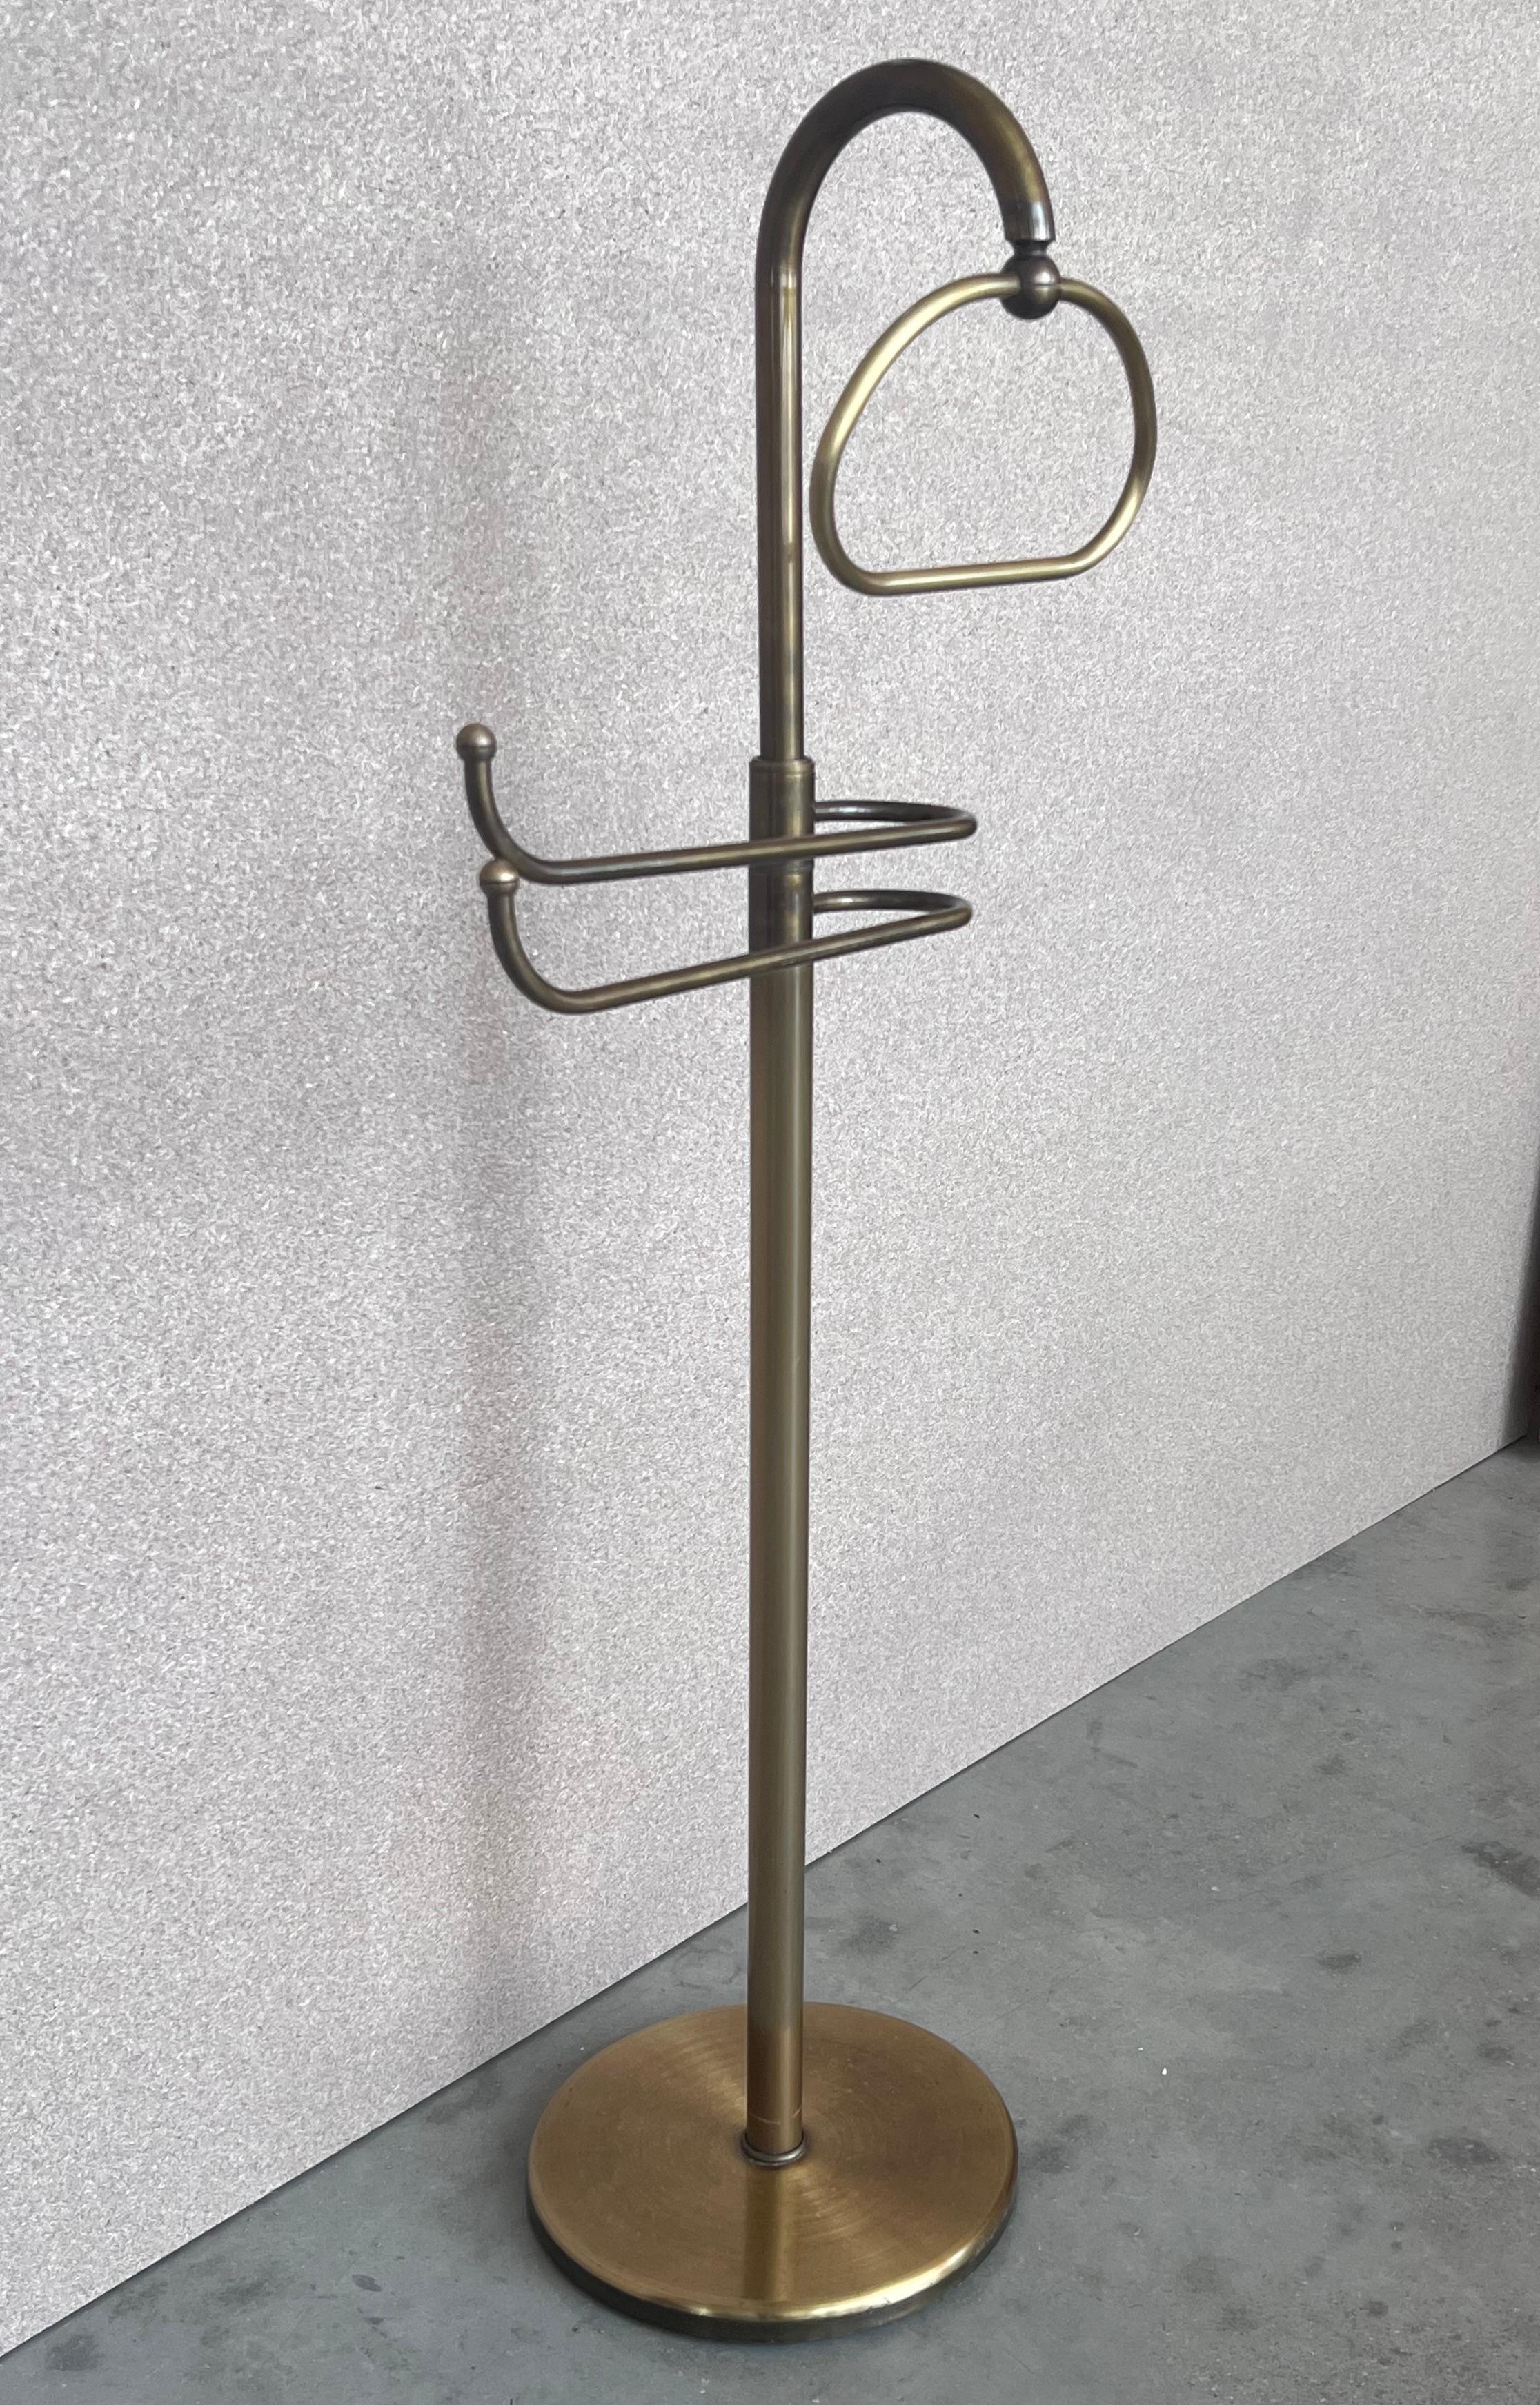 French Art Deco Gentleman’s floor standing brass suit hanger or dumb valet A very useful piece, the hanger or clothes stand is in brass and has a circular base, it has a small circular tray at the top for cufflinks etc. and a central brass rail for